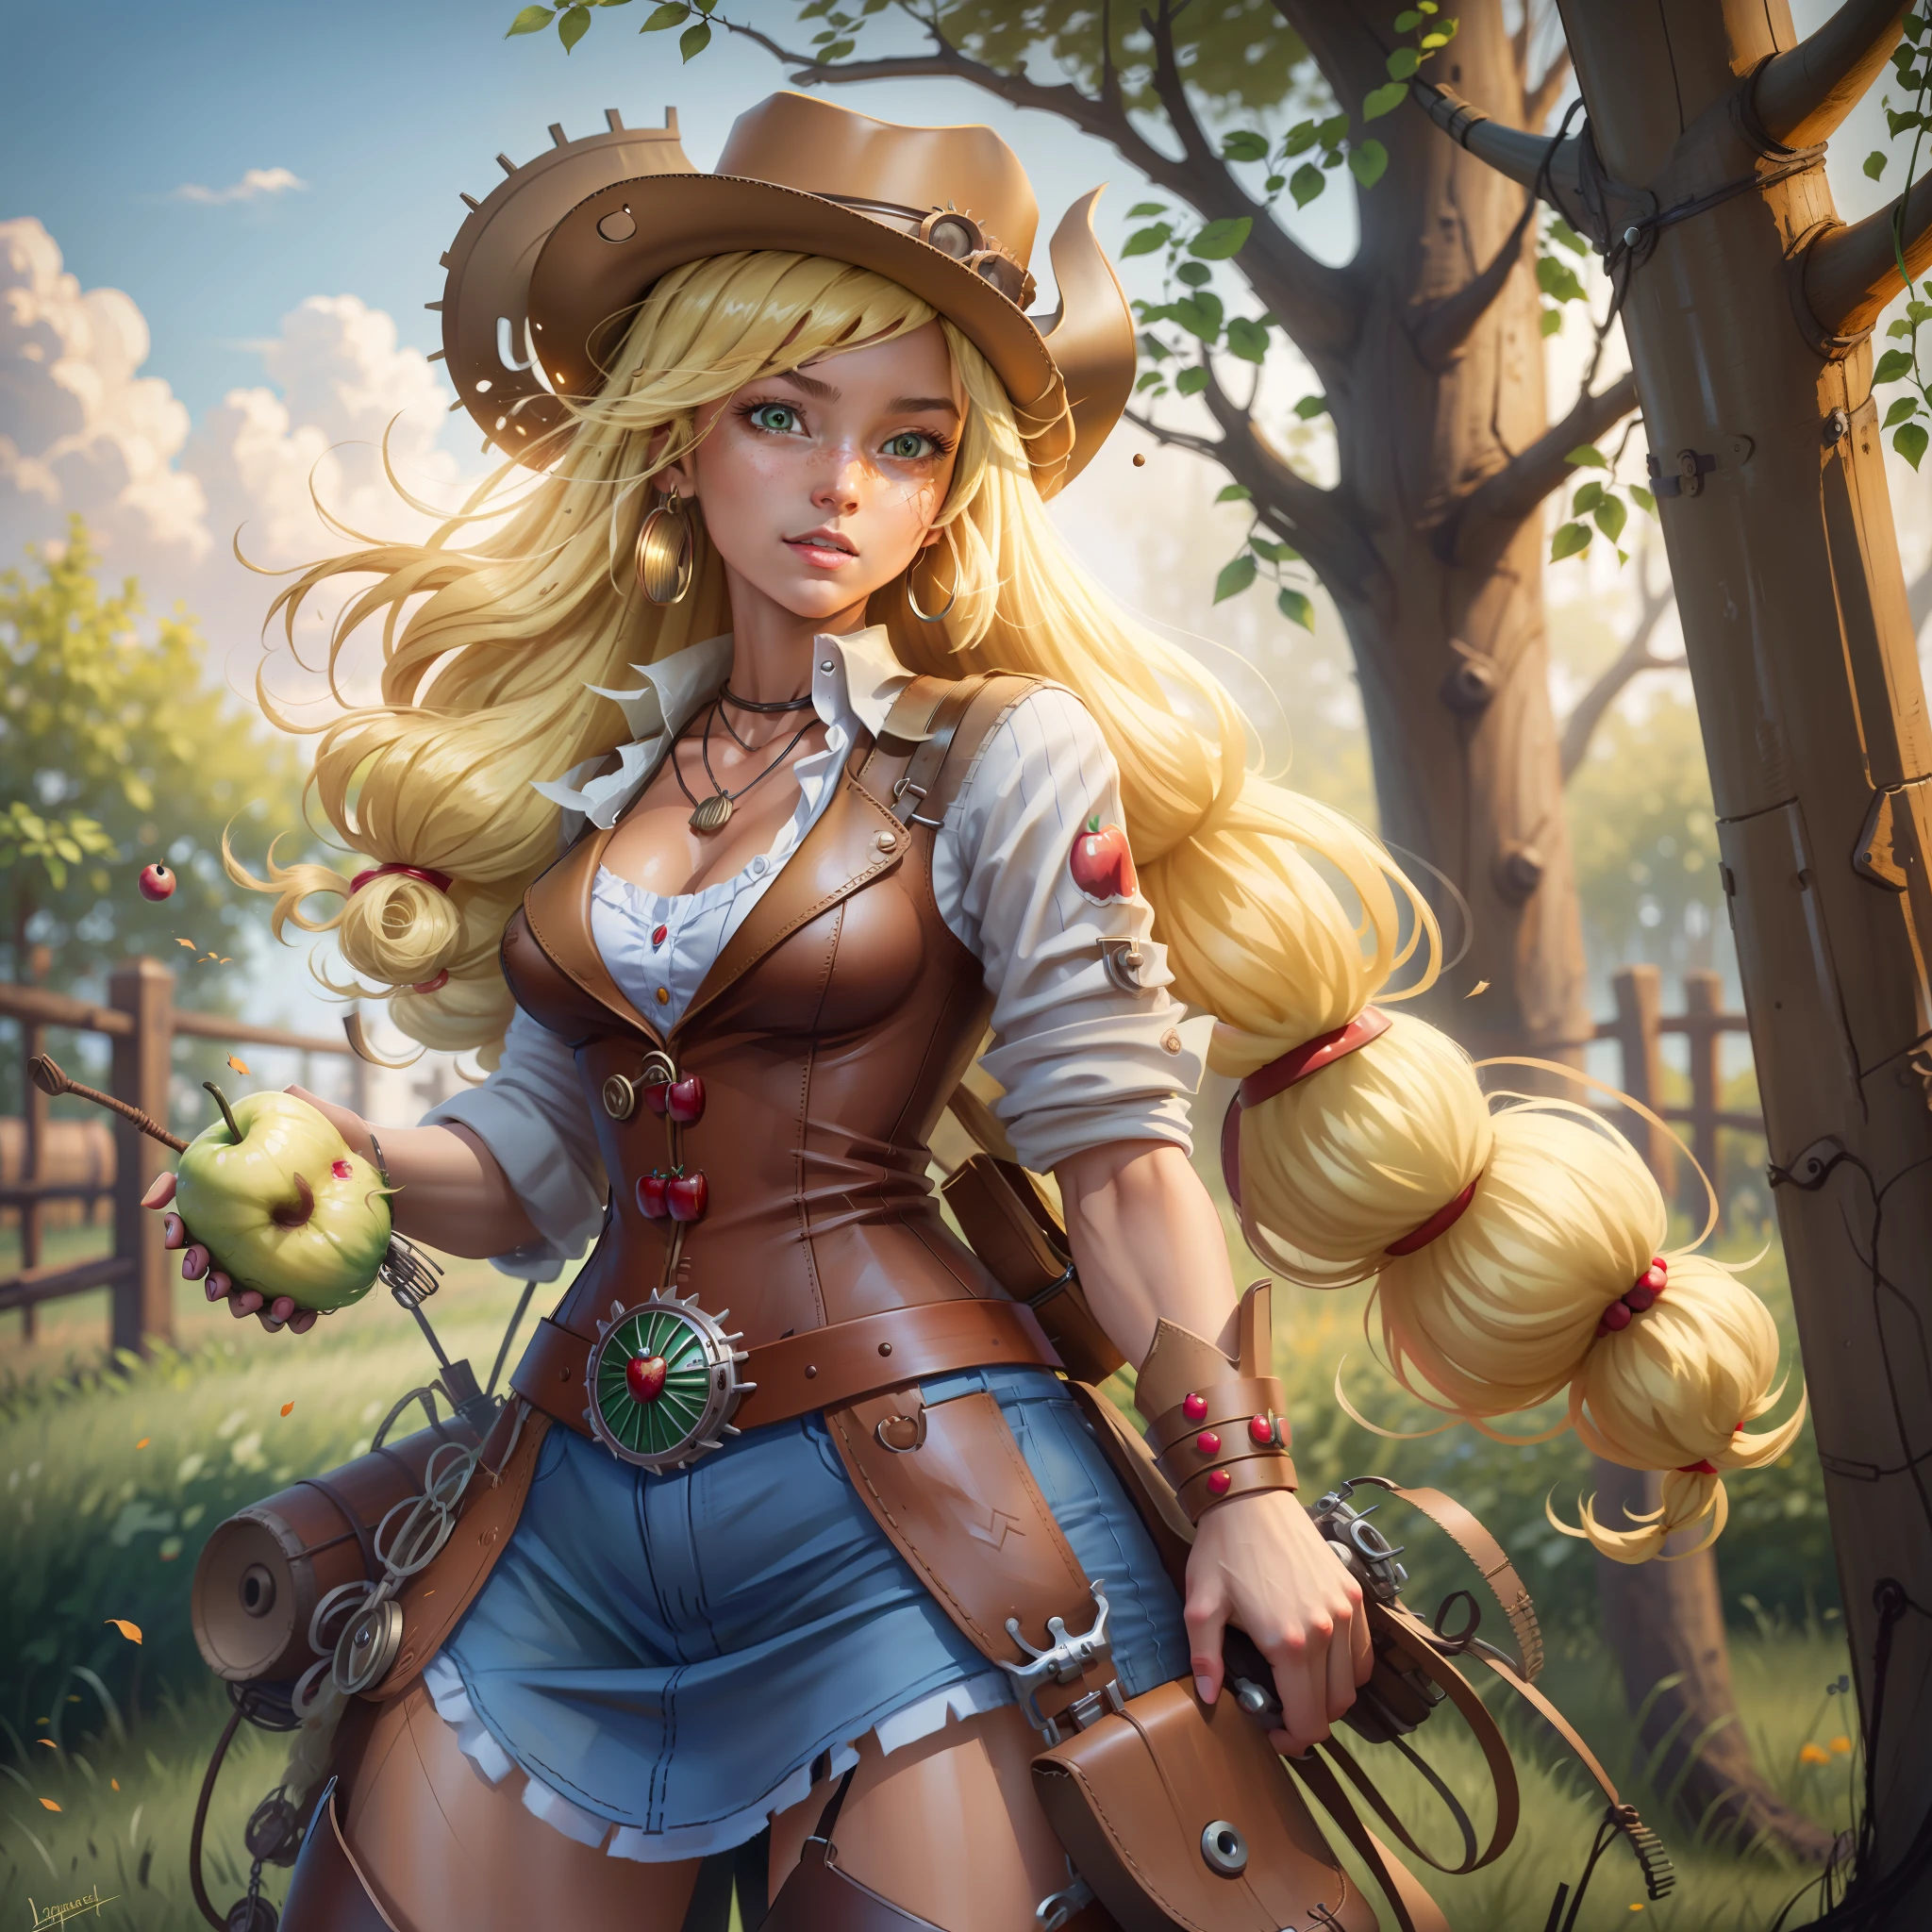 AppleJack, AppleJack from my little pony, AppleJack in the form of a girl, long hair, lush hair, steampunk, steampunk machinery, golden gears, not human, gear leather, cowboy boots, full-length, cowboy hat, apple earrings, on a farm with apple trees, steampunk style, a lot of magic, lightning nets, best quality, very detailed, ultra 8k resolution